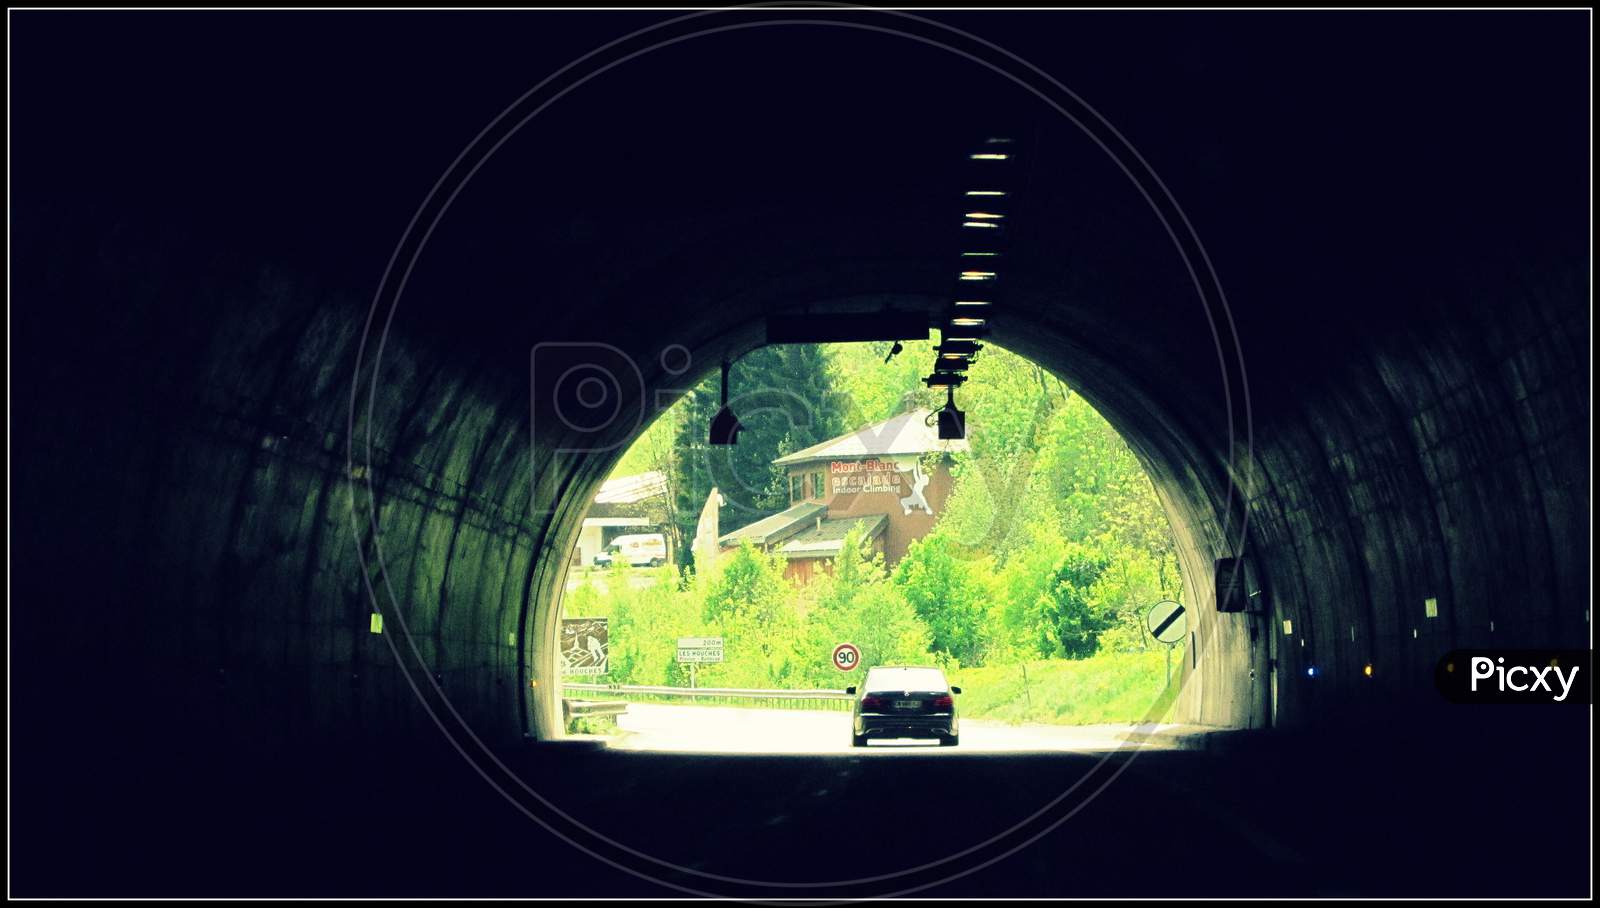 Car at the end of tunnel